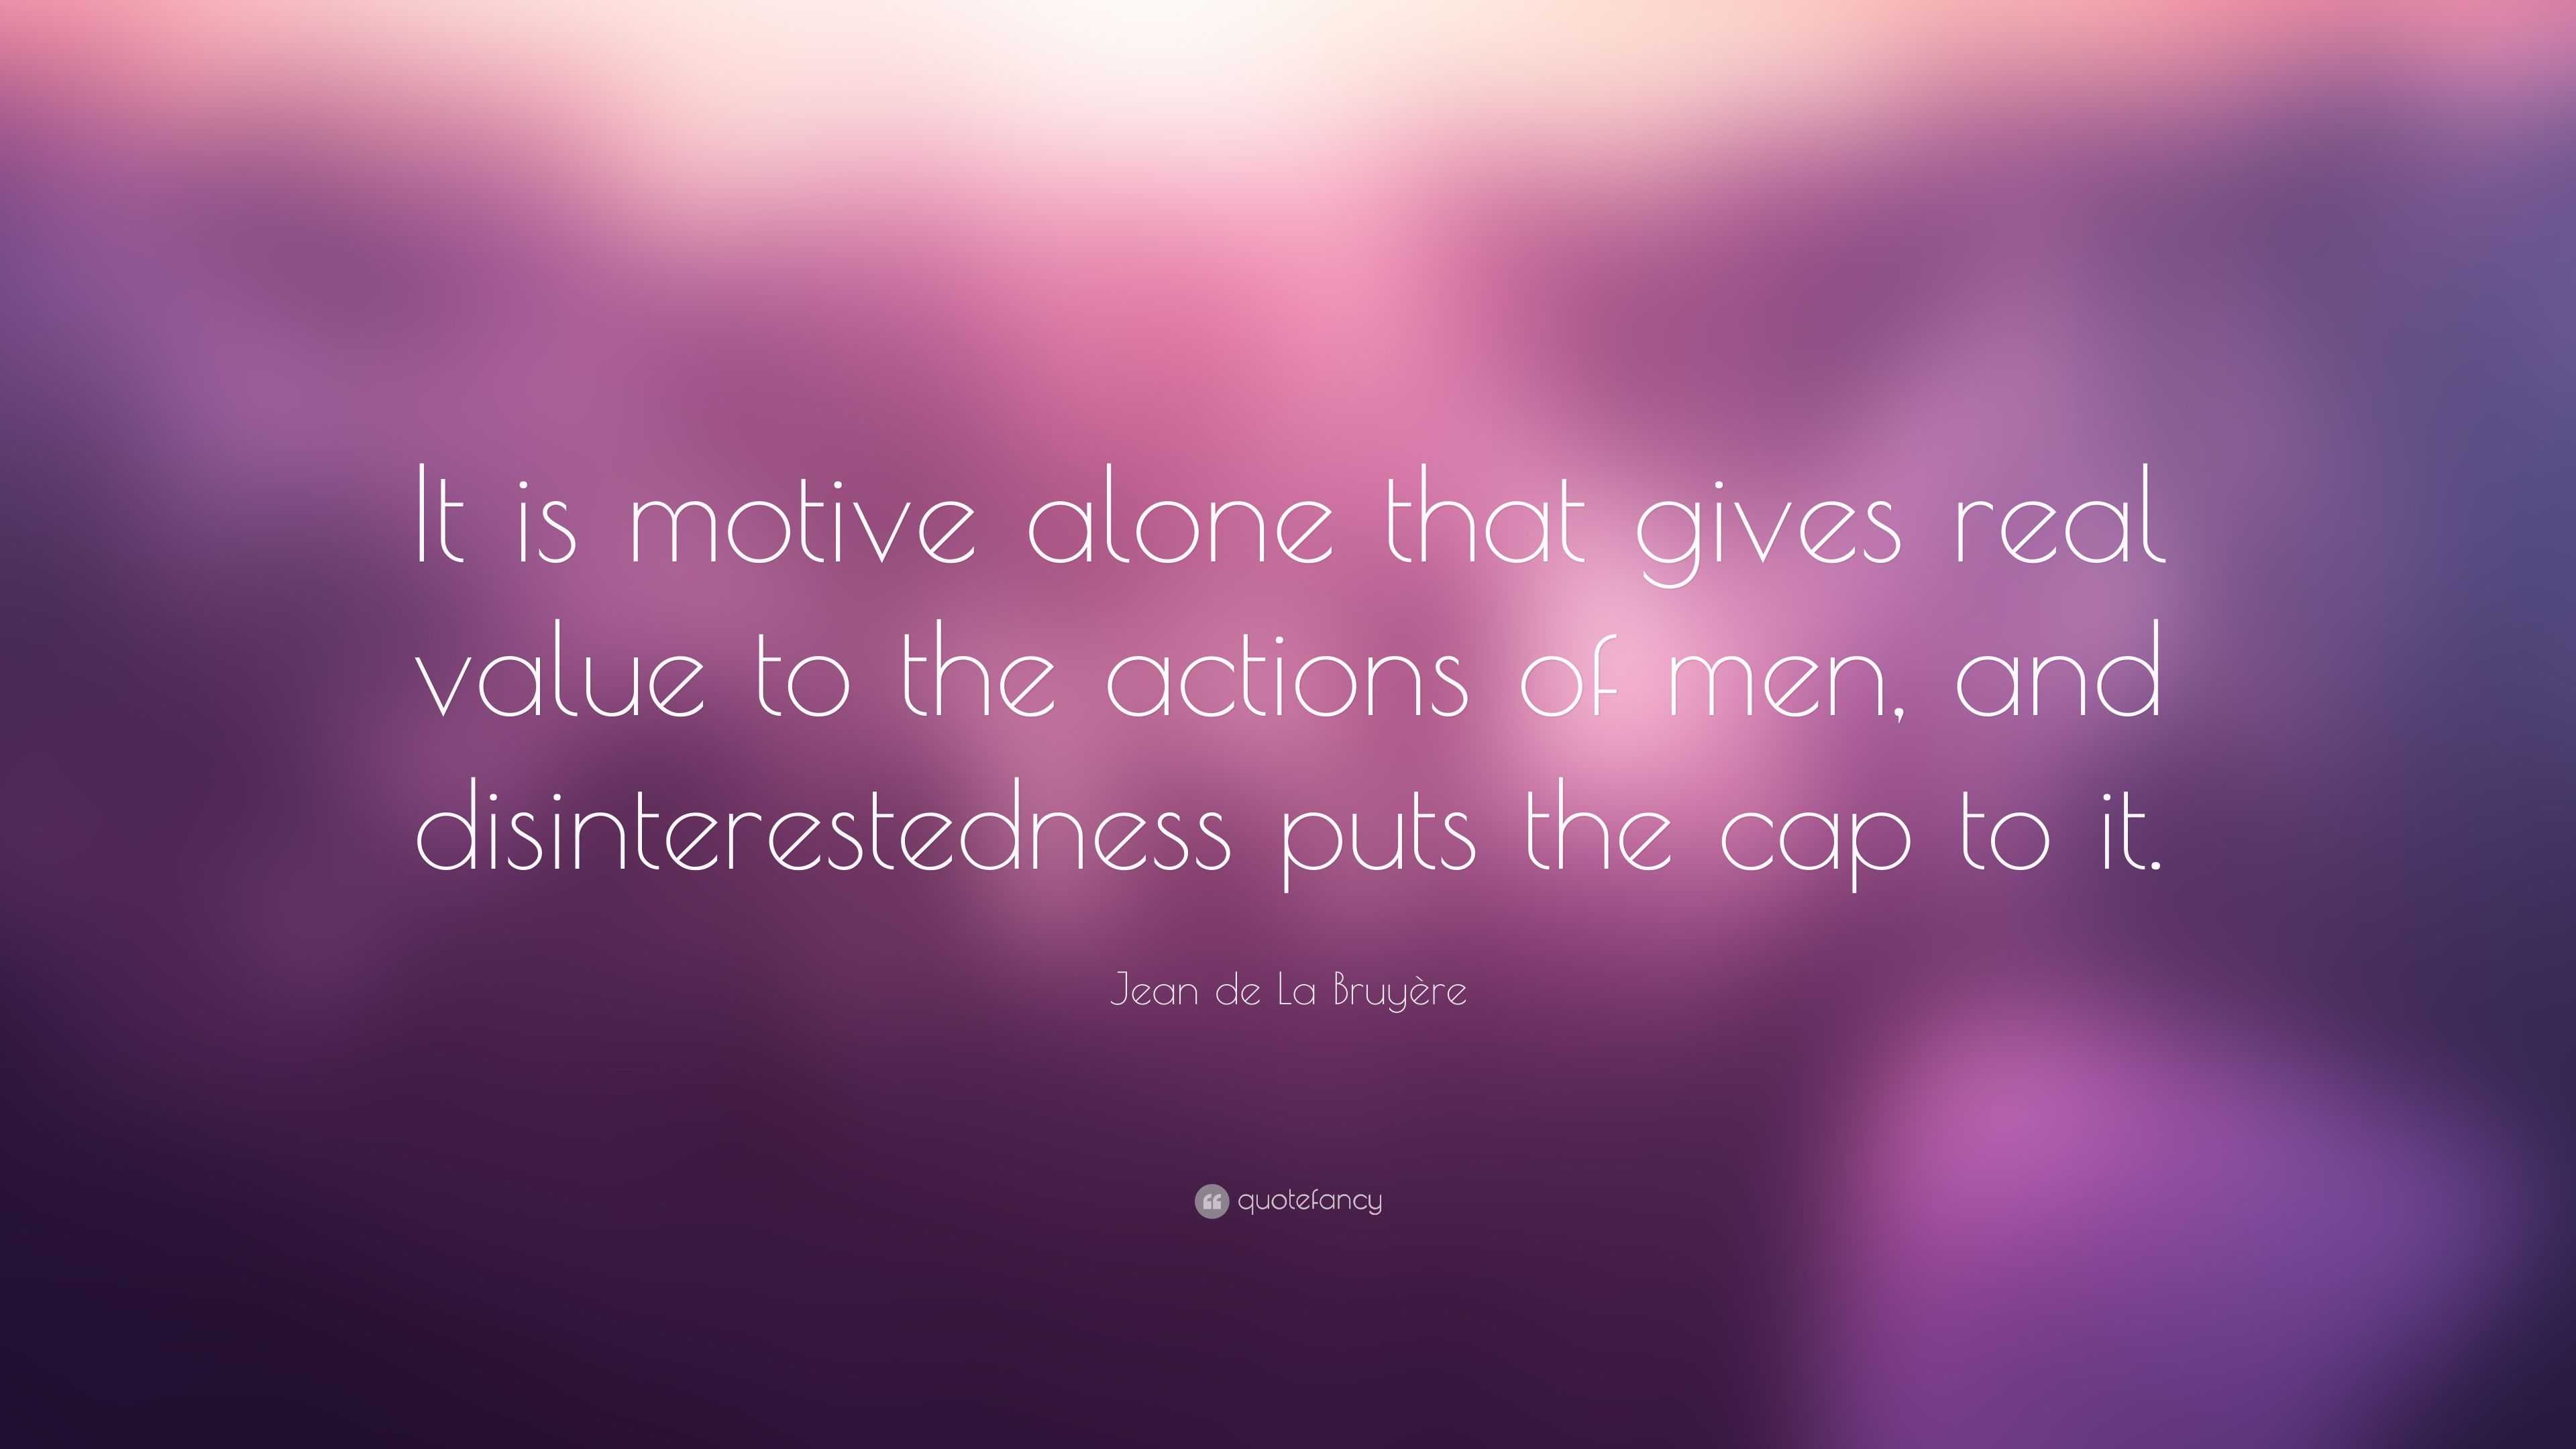 Jean de La Bruyère Quote: “It is motive alone that gives real value to ...